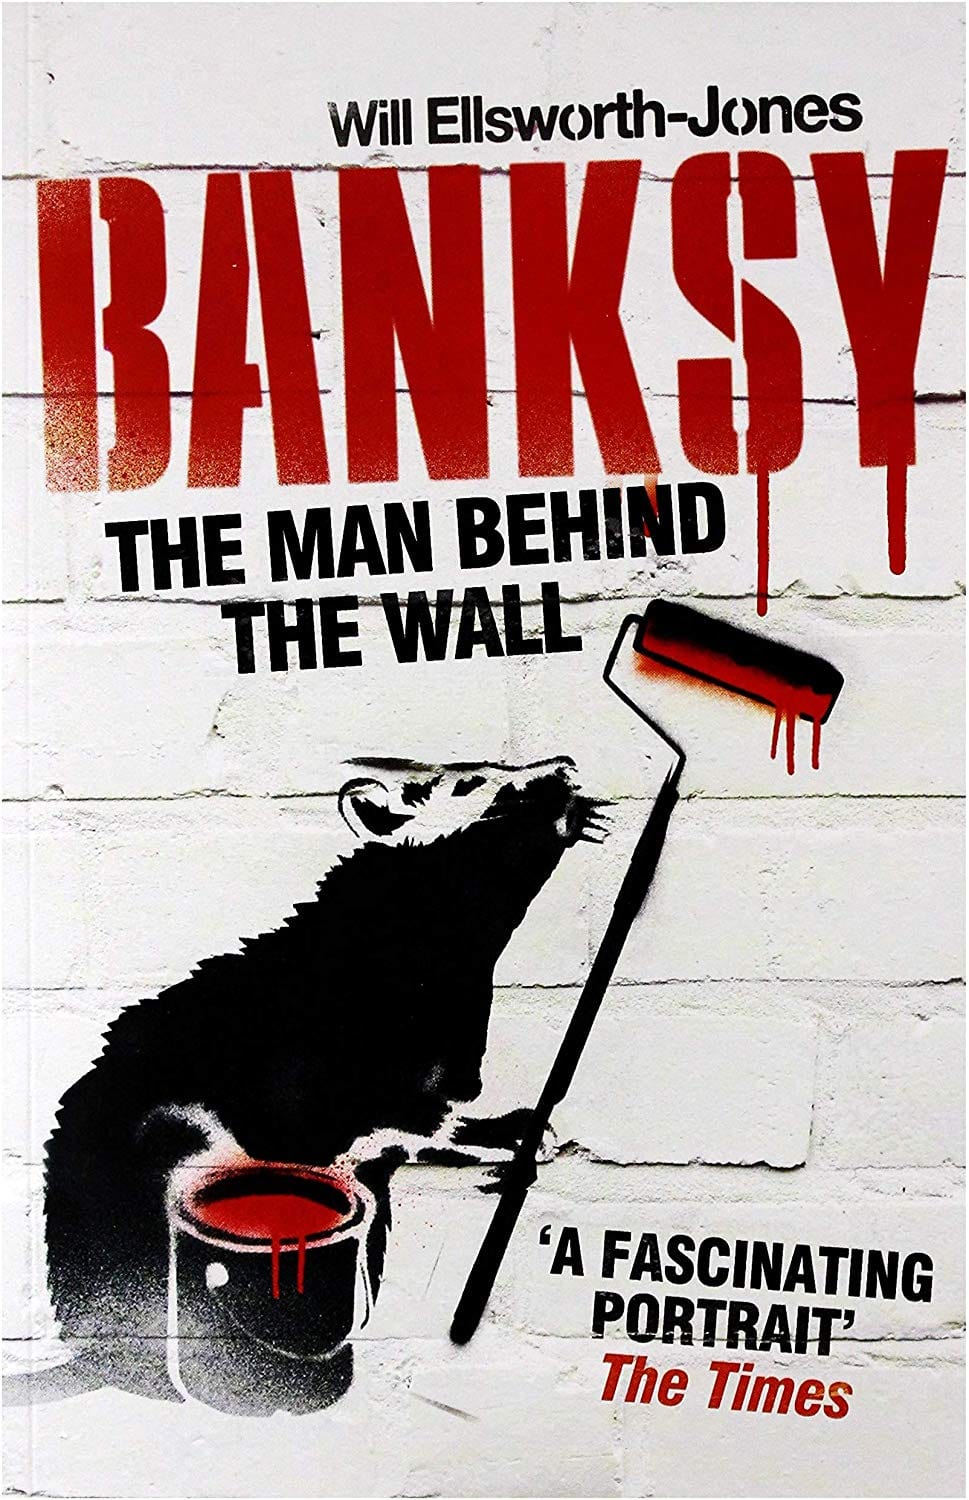 Banksy - The Man Behind The Wall [Books]